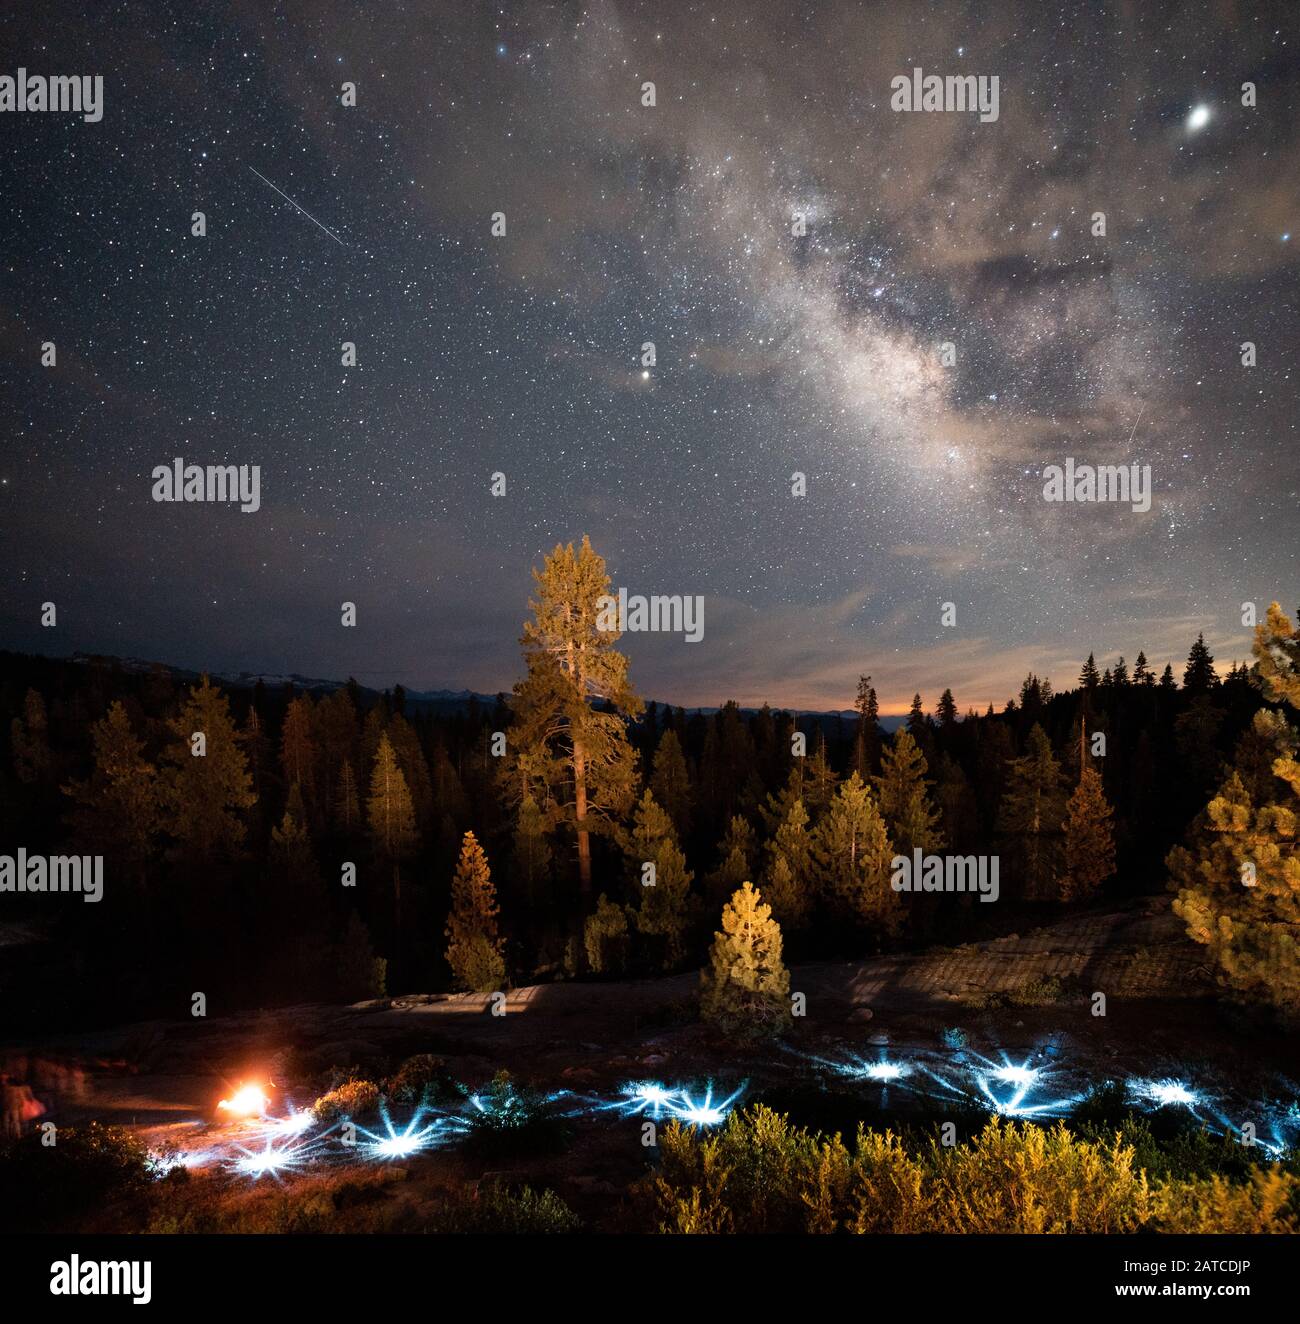 Milky Way and Shooting Star over Festive Lights and a campfire, Kings Canyon, Sequoia National Park, California, USA Stock Photo